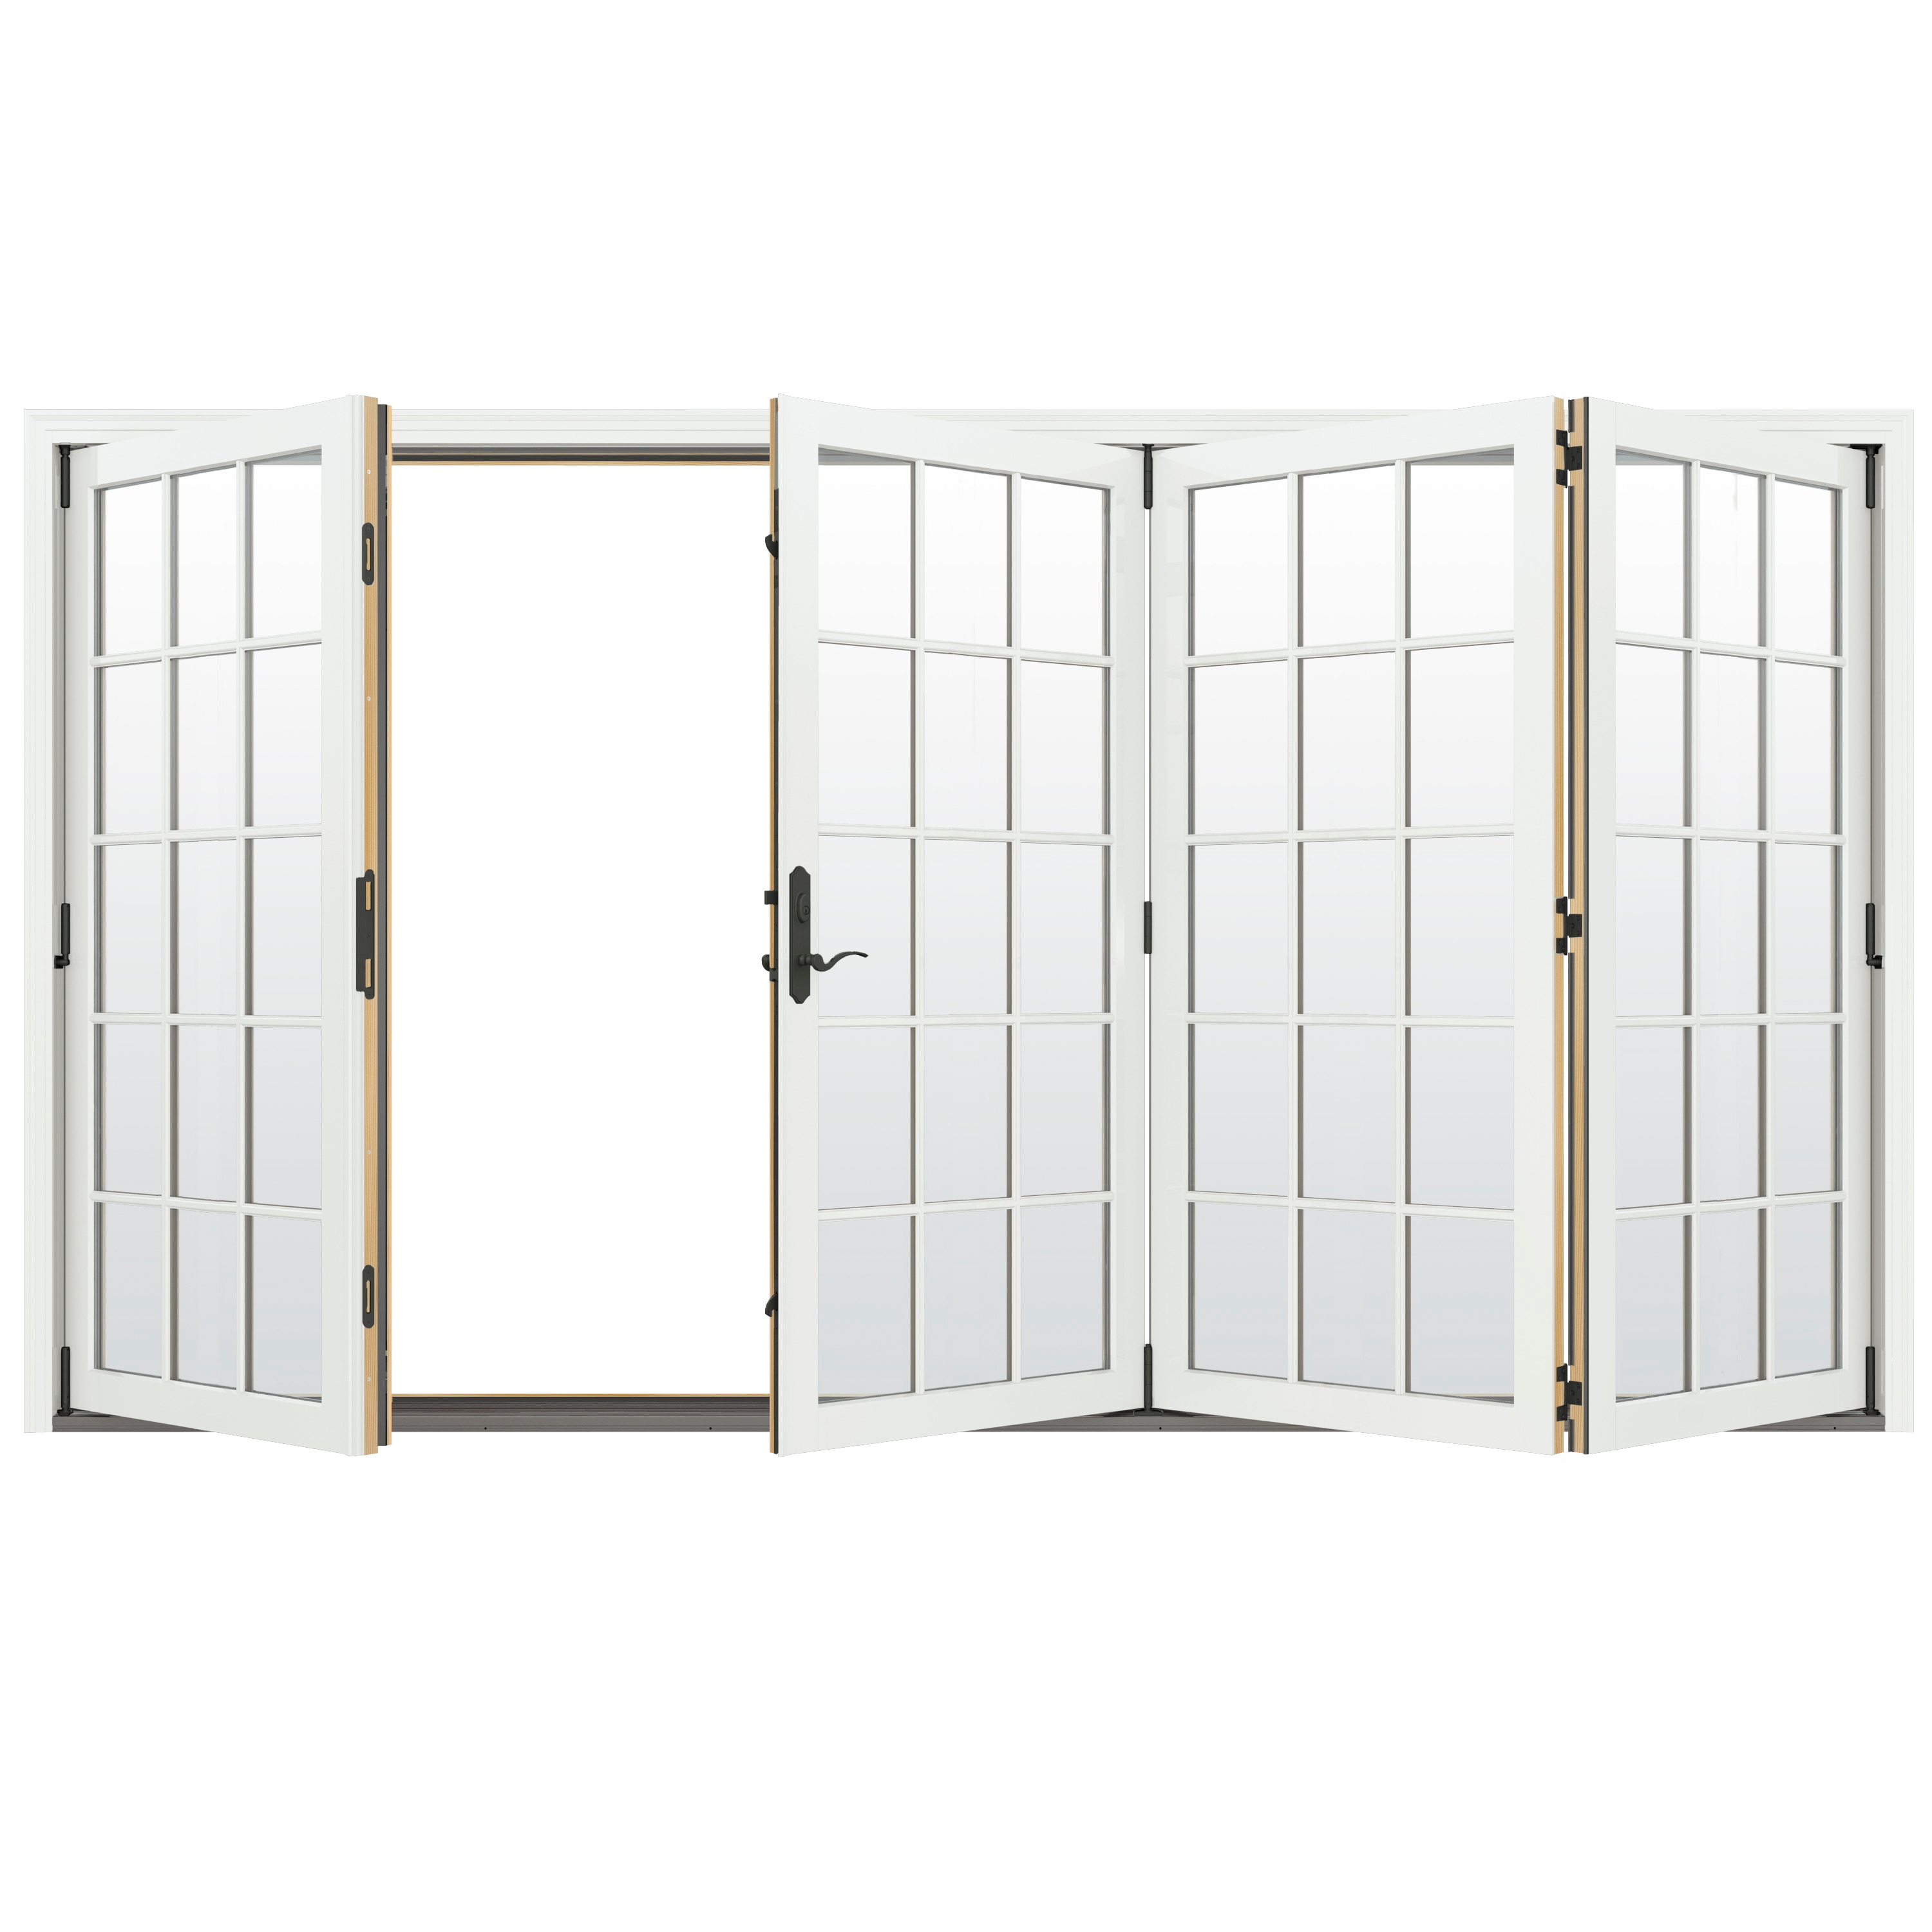 124-in x 80-in Low-e Argon Simulated Divided Light White Clad-wood Folding Right-Hand Outswing Patio Door | - JELD-WEN LOWOLJW247800109